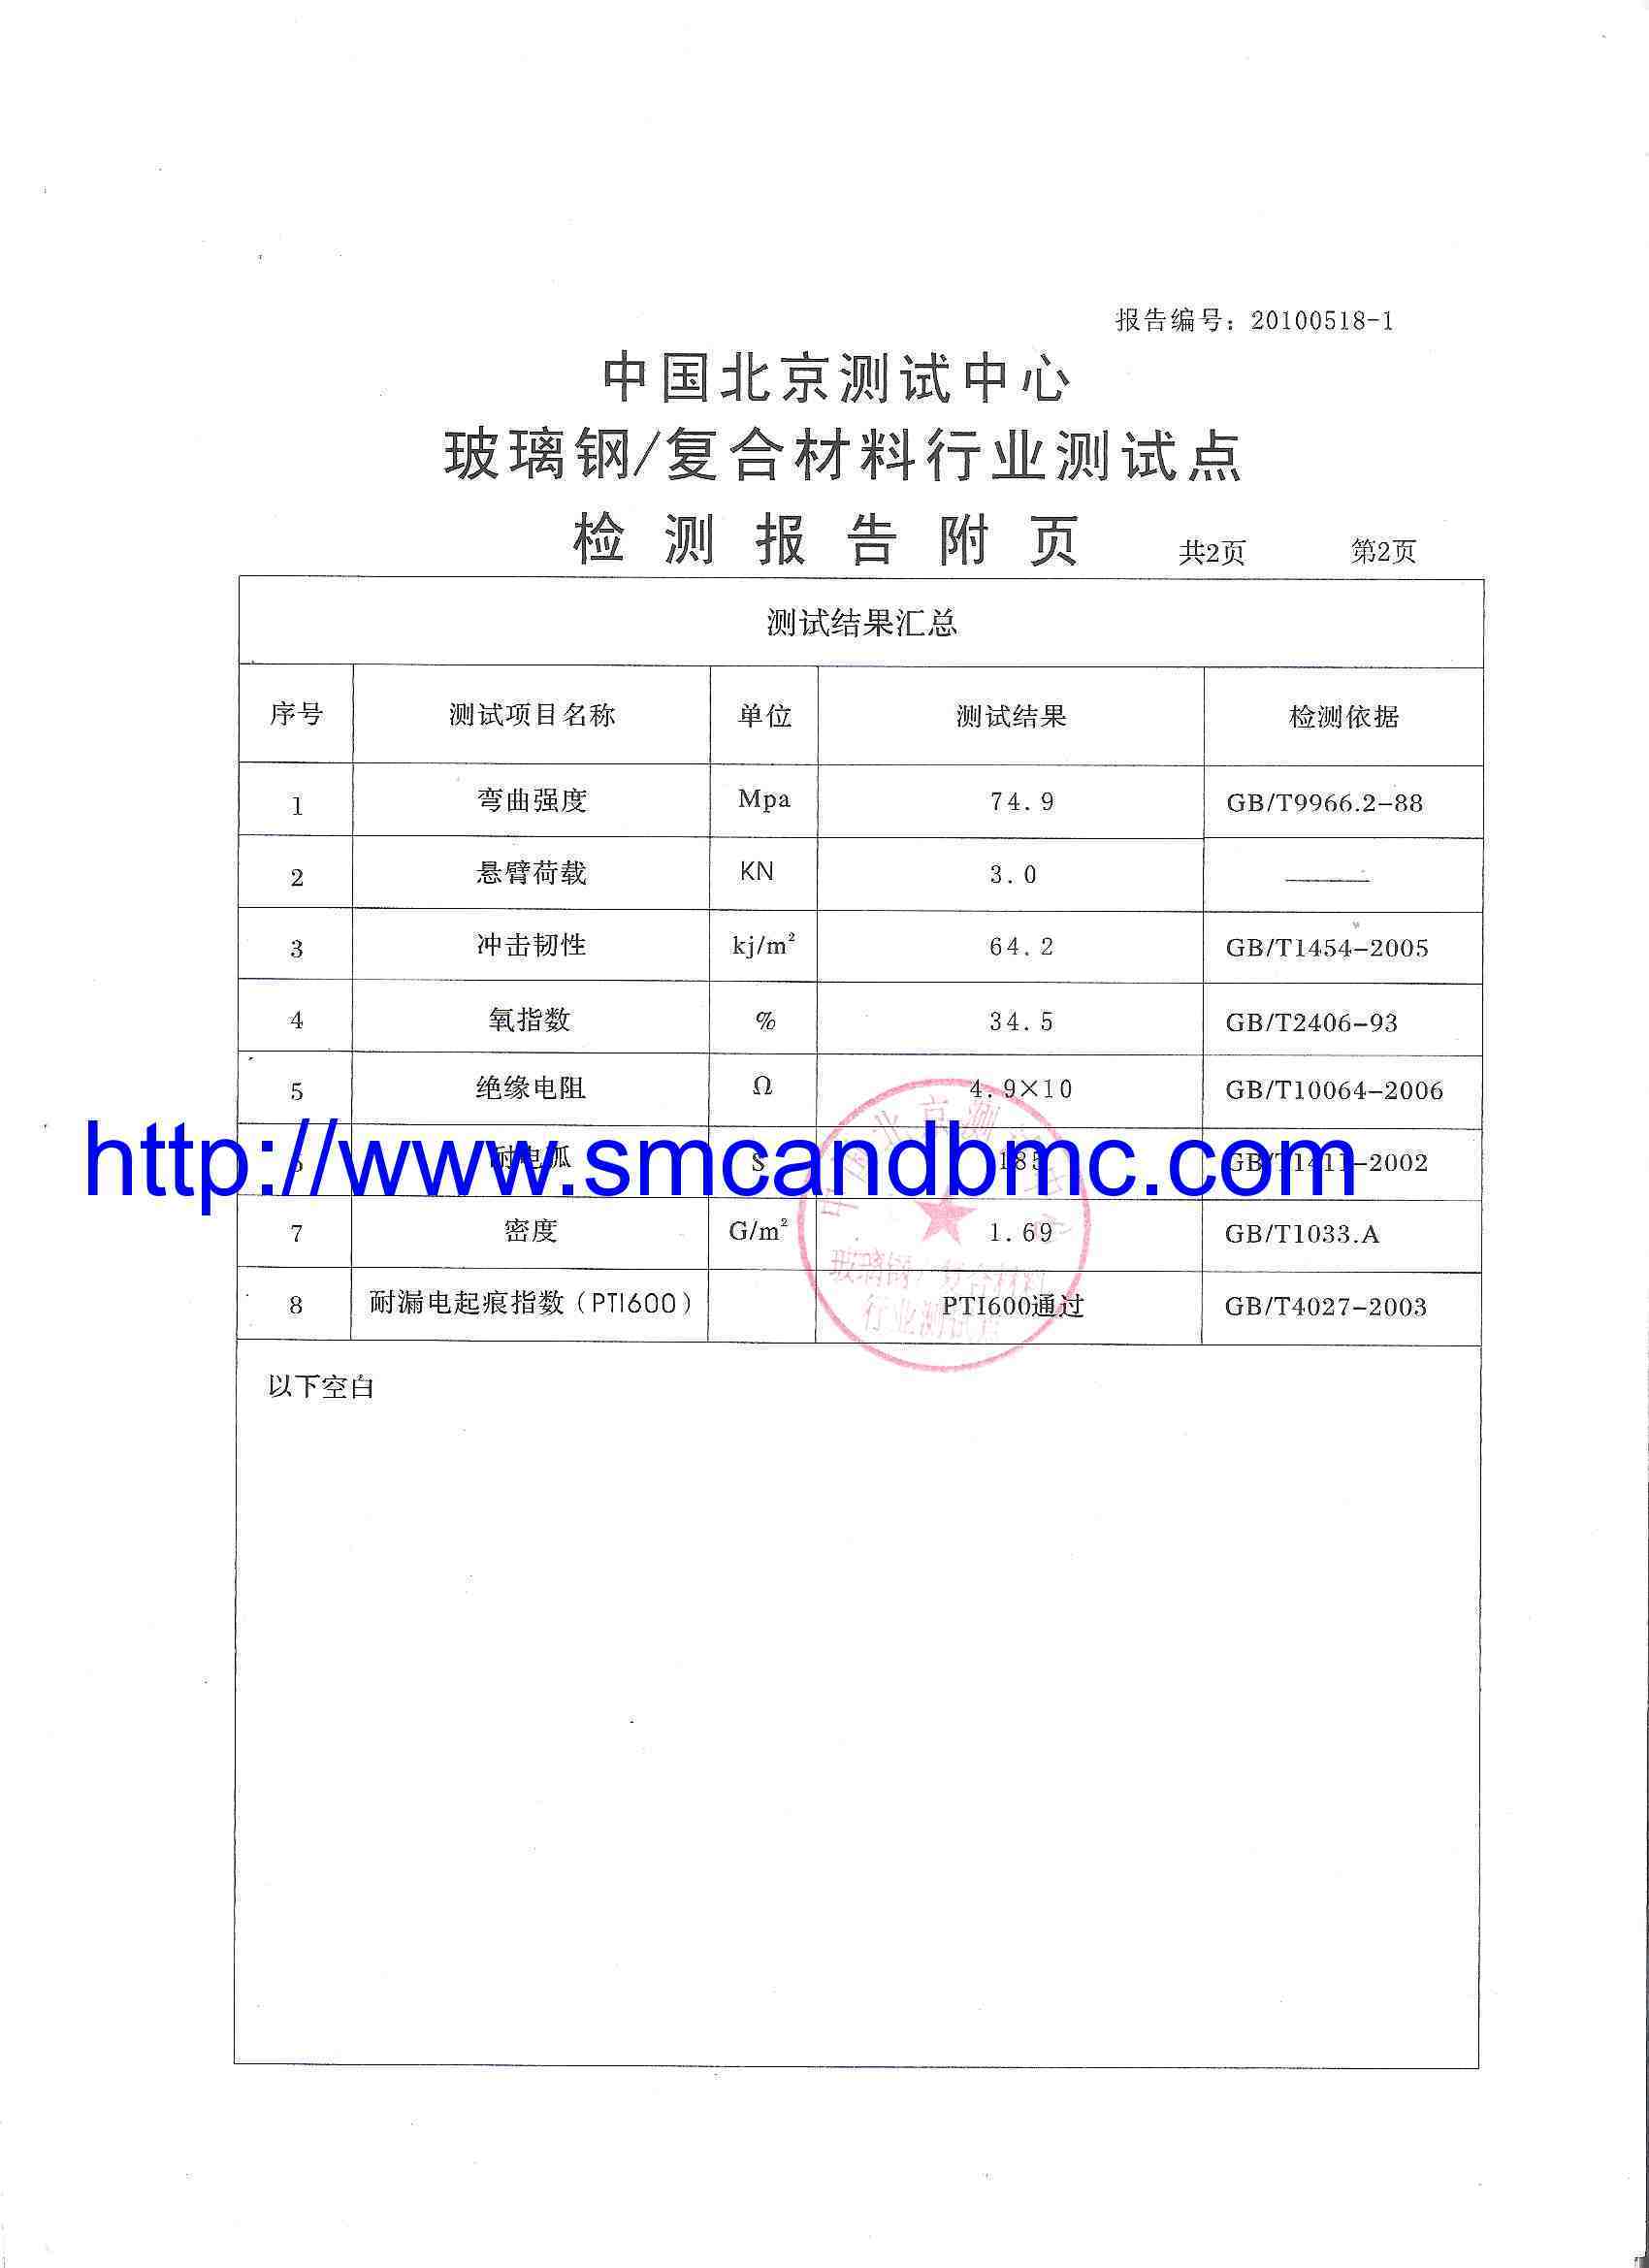 Cable bracket testing report